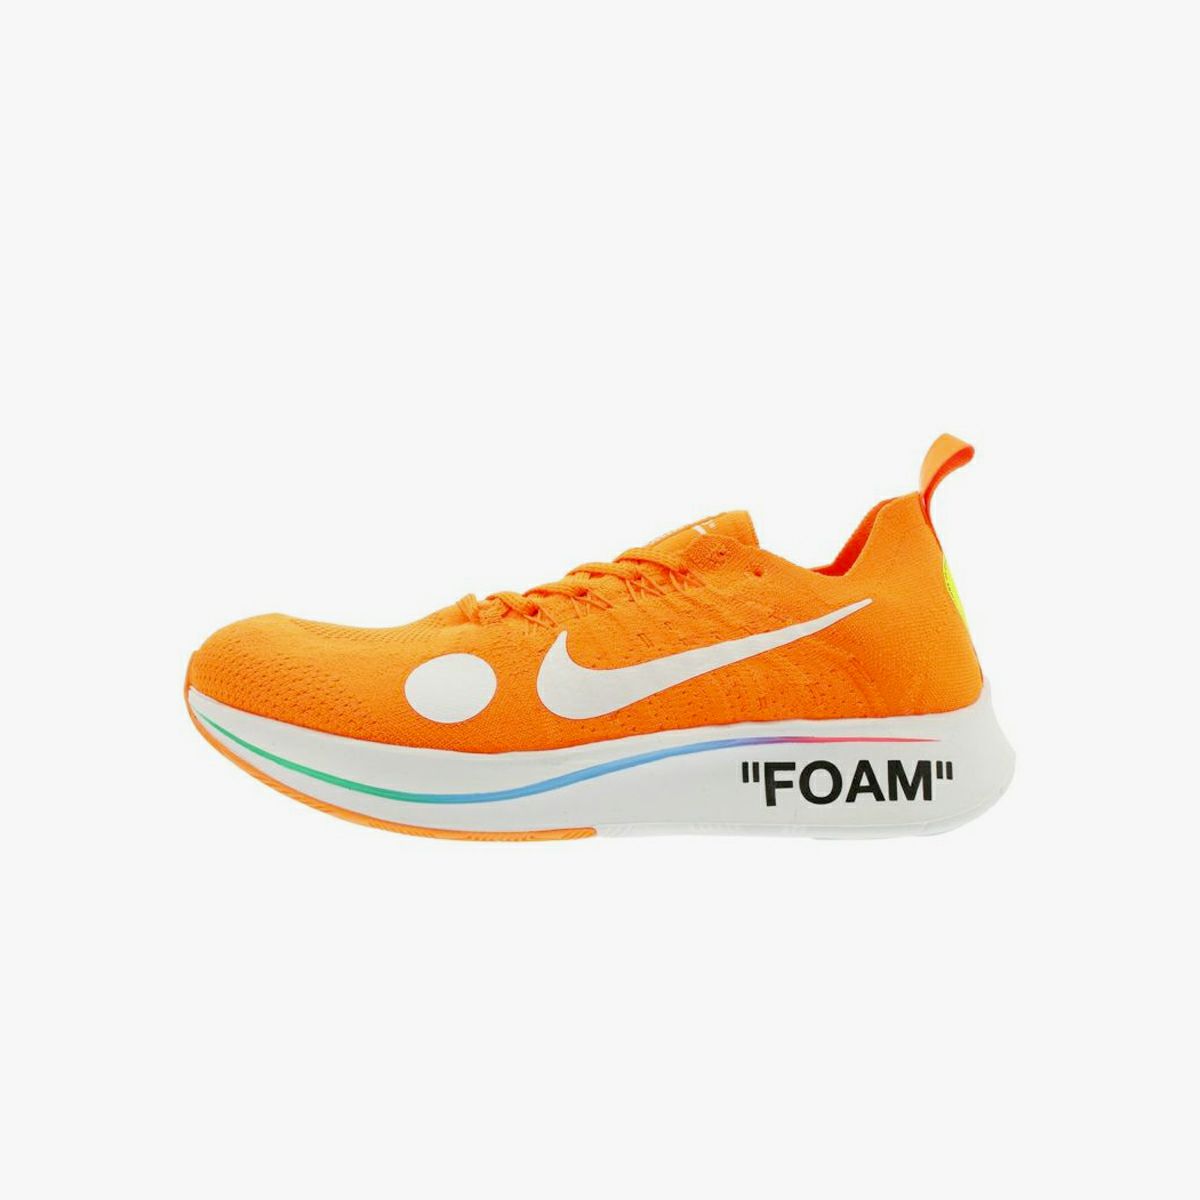 NIKE LAB × OFF-WHITE ZOOM FLY MERCURIAL